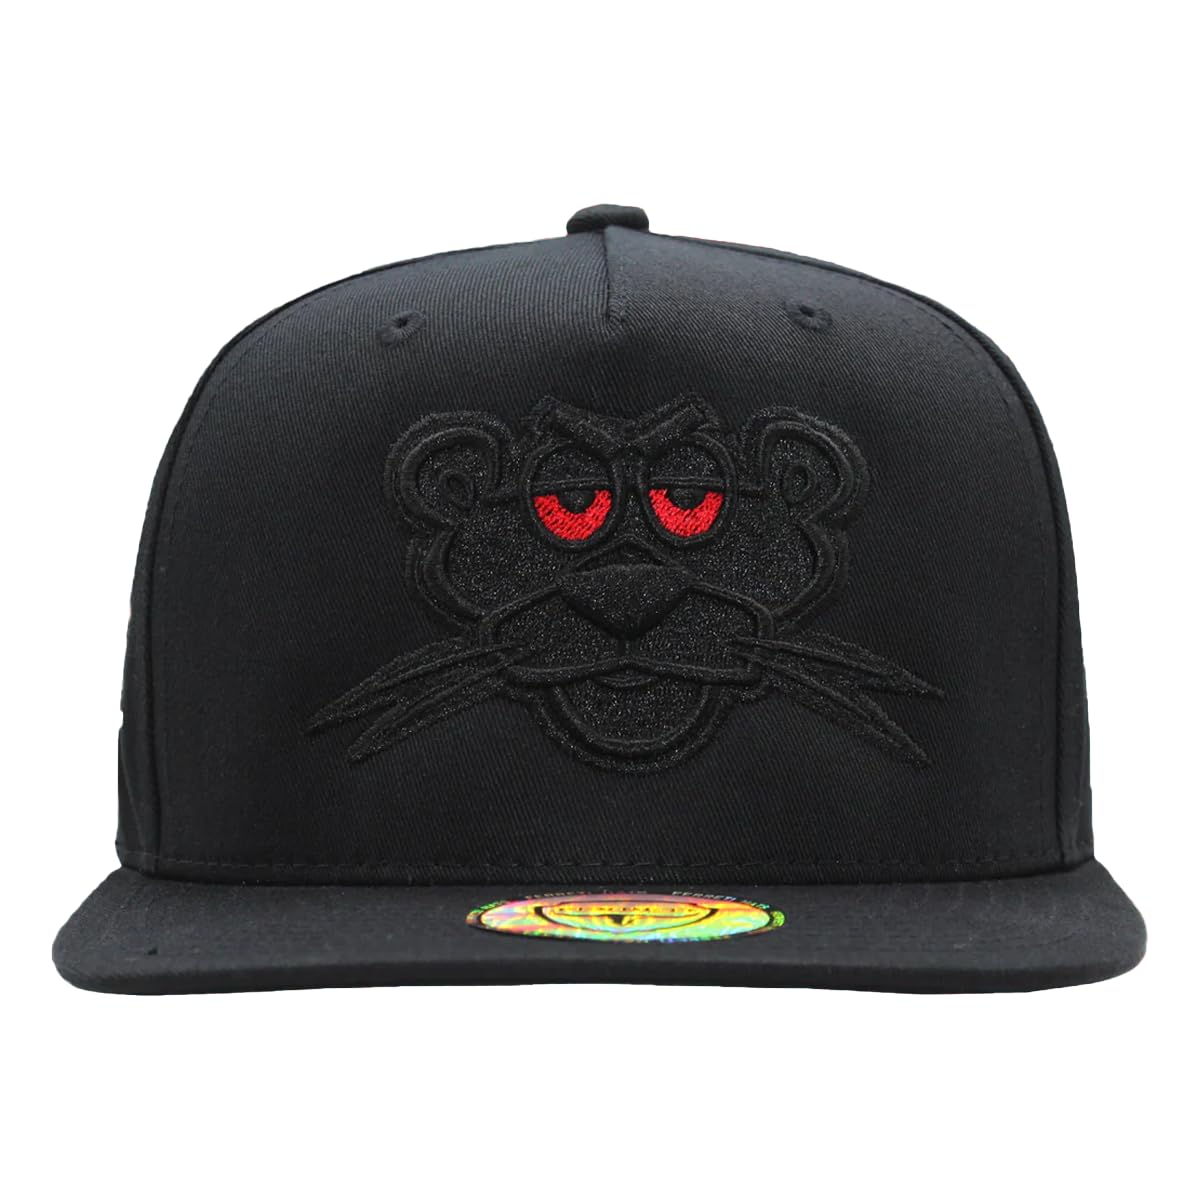 Culiacan The Panther Flat Bill Hats for Men and Women - Black Baseball Cap, Mens Snapback Hats, Gorras Planas para Hombres - Adjustable Size - Caps Fitted Caps Fitted Ferreti